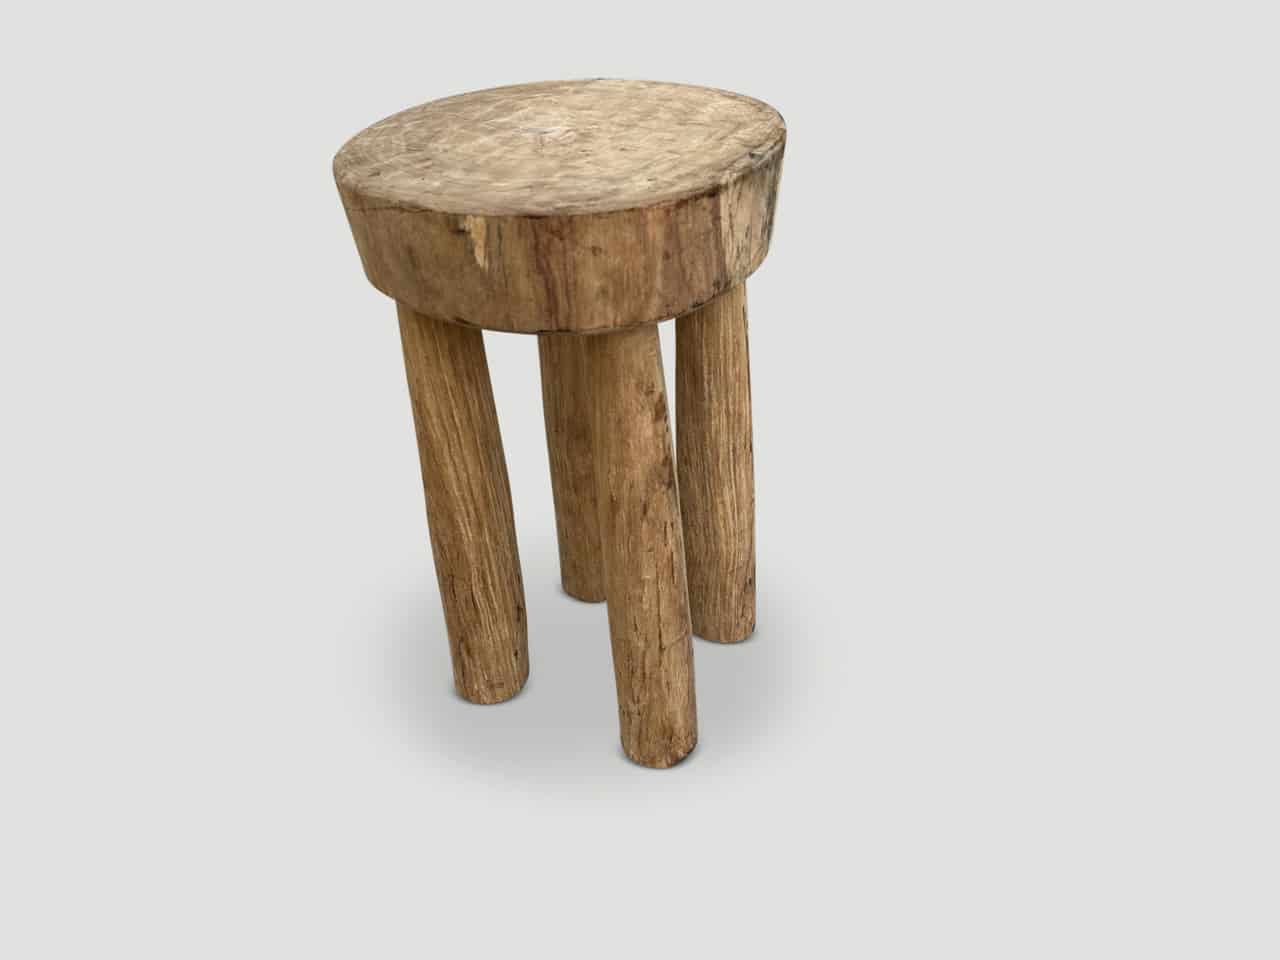 SENUFO SIDE TABLE OR STOOL FROM COTE D’IVOIRE